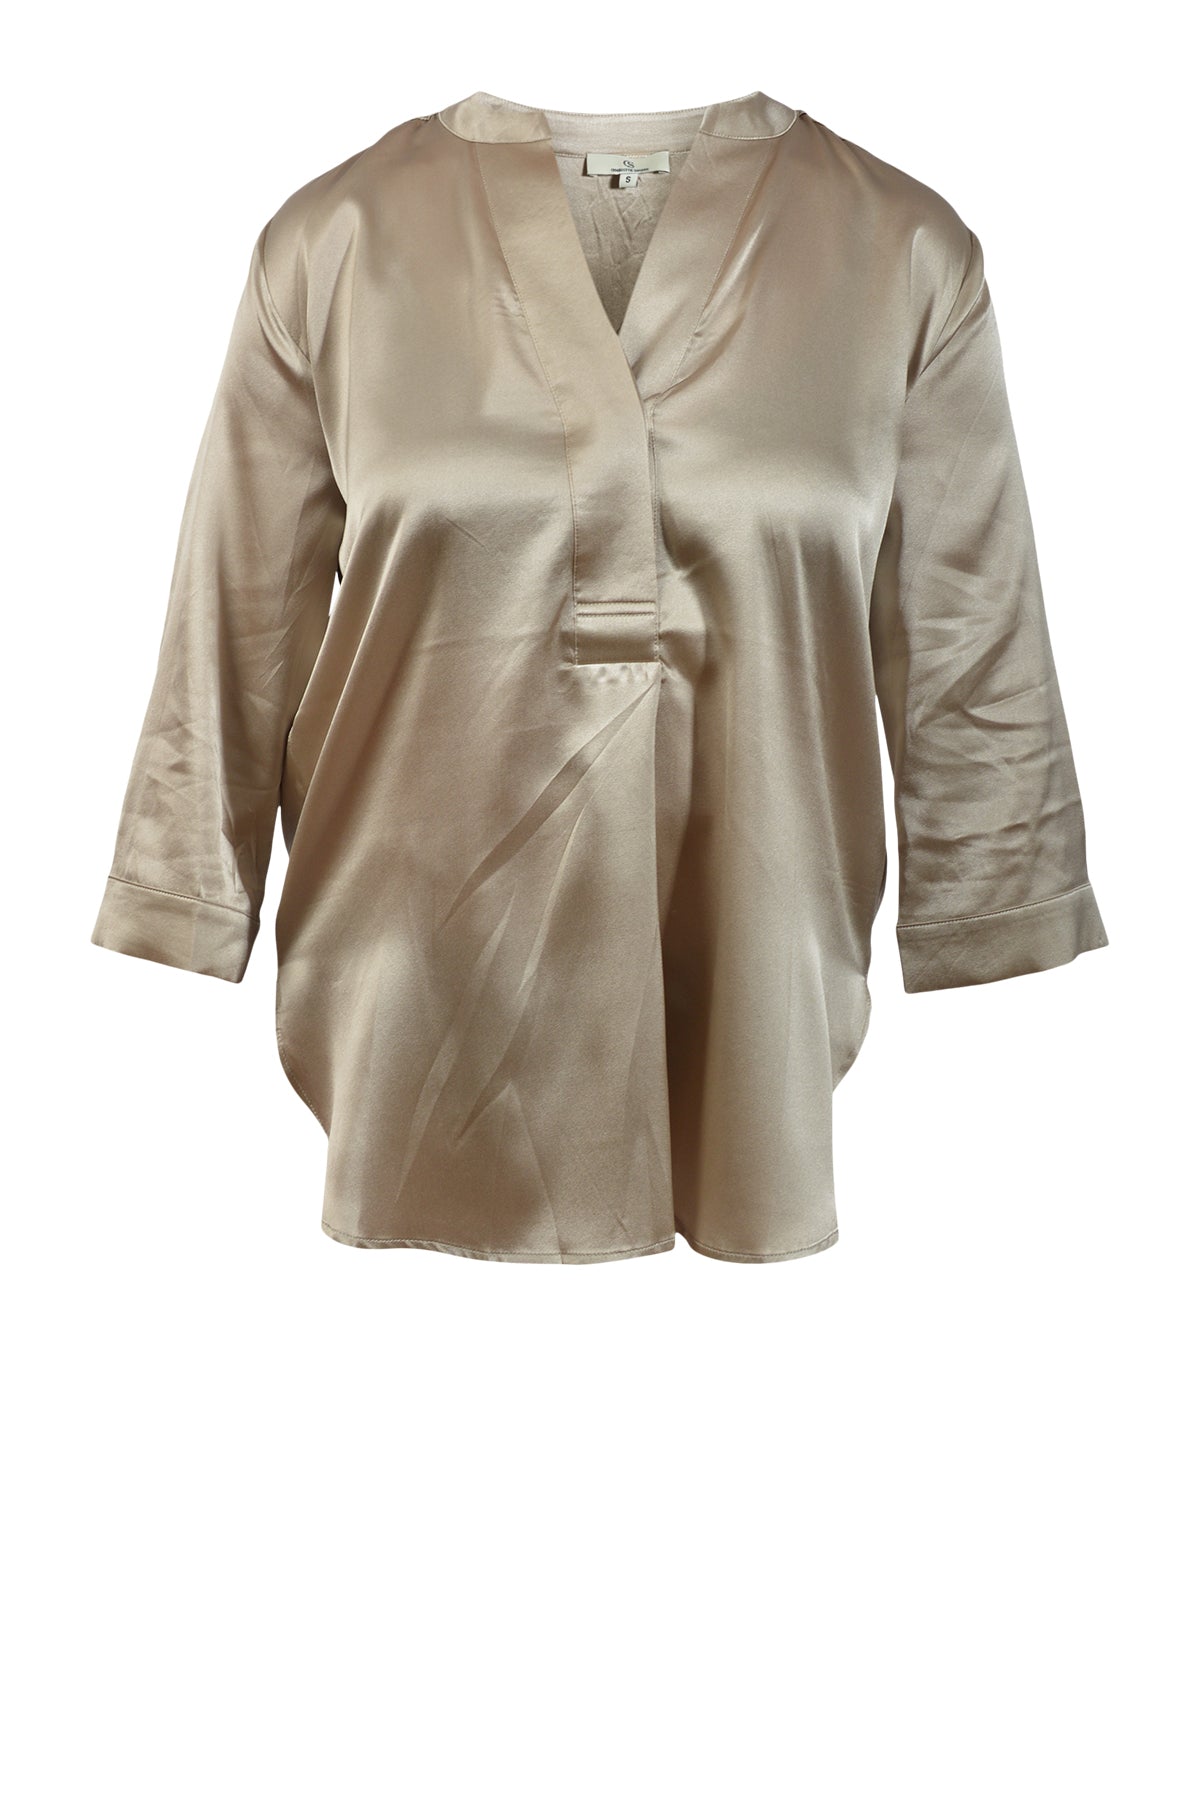 Charlotte Sparre  Bliss blouse 2708, Solid satin Sand